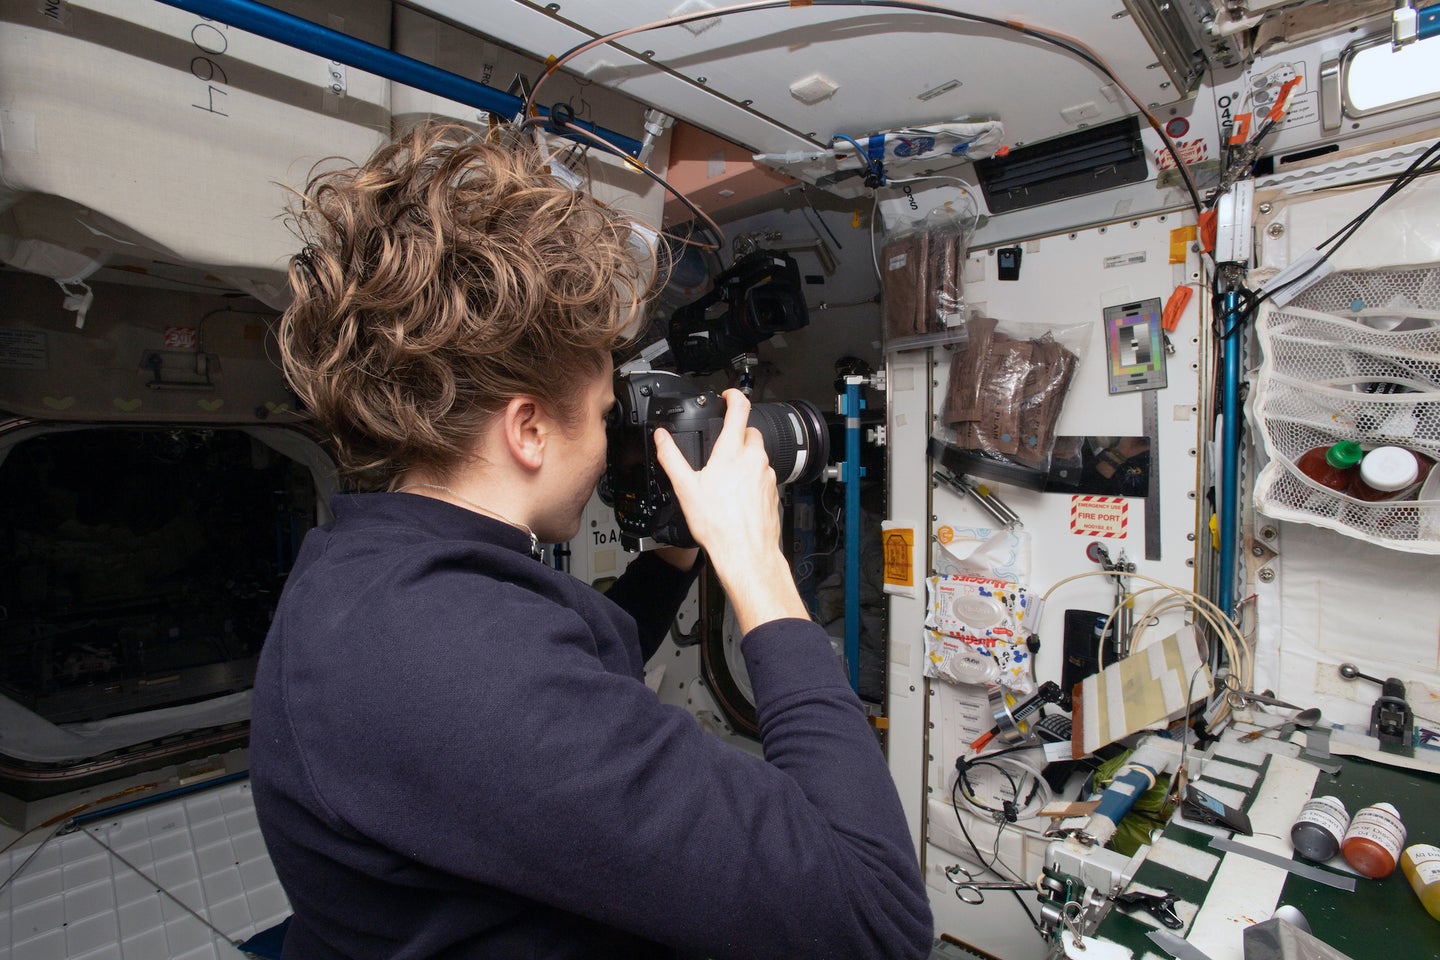 a female astronaut on the international space station takes a picture of section of the station with equipment